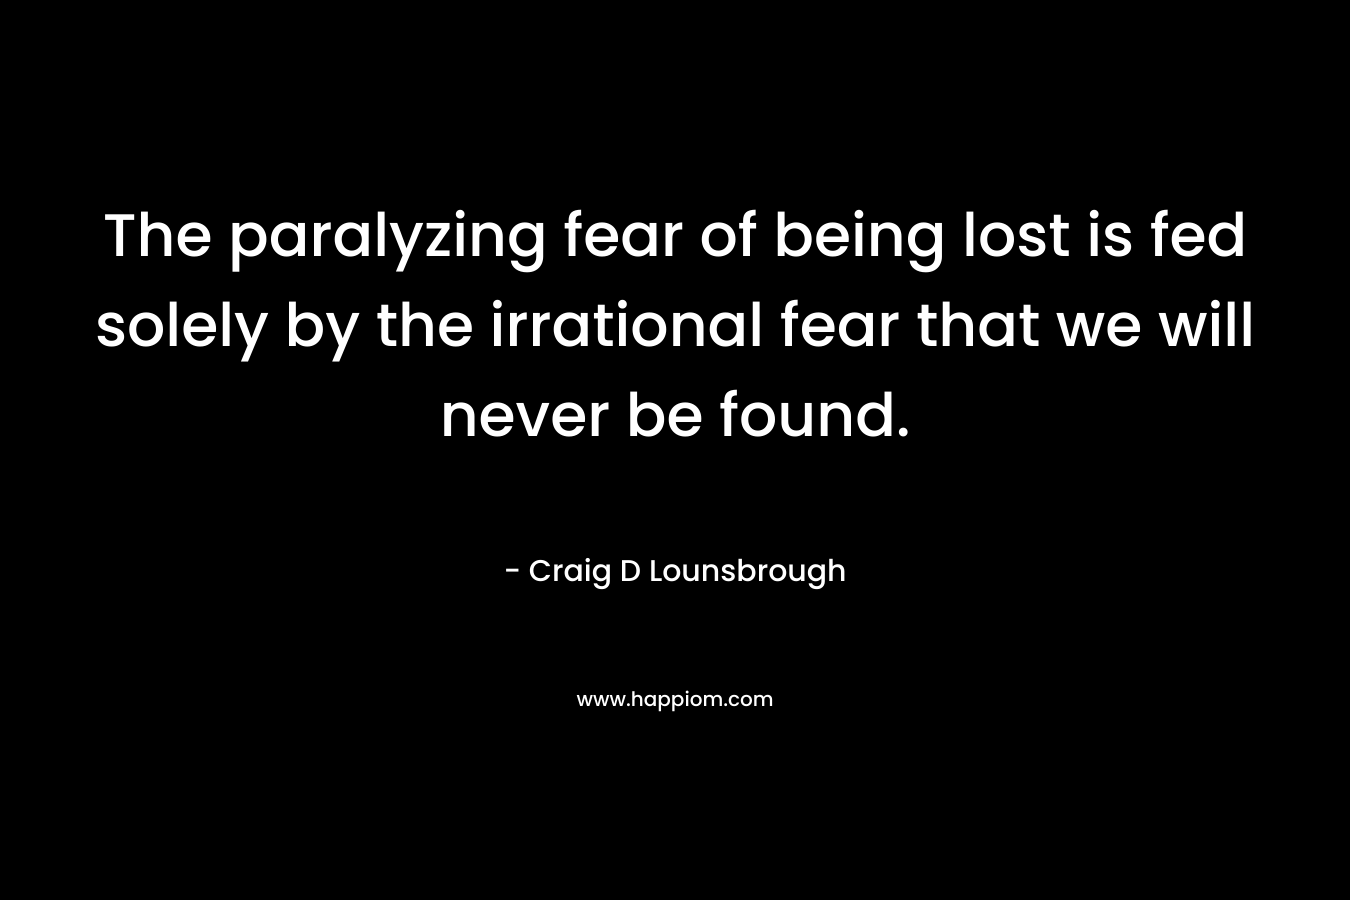 The paralyzing fear of being lost is fed solely by the irrational fear that we will never be found. – Craig D Lounsbrough